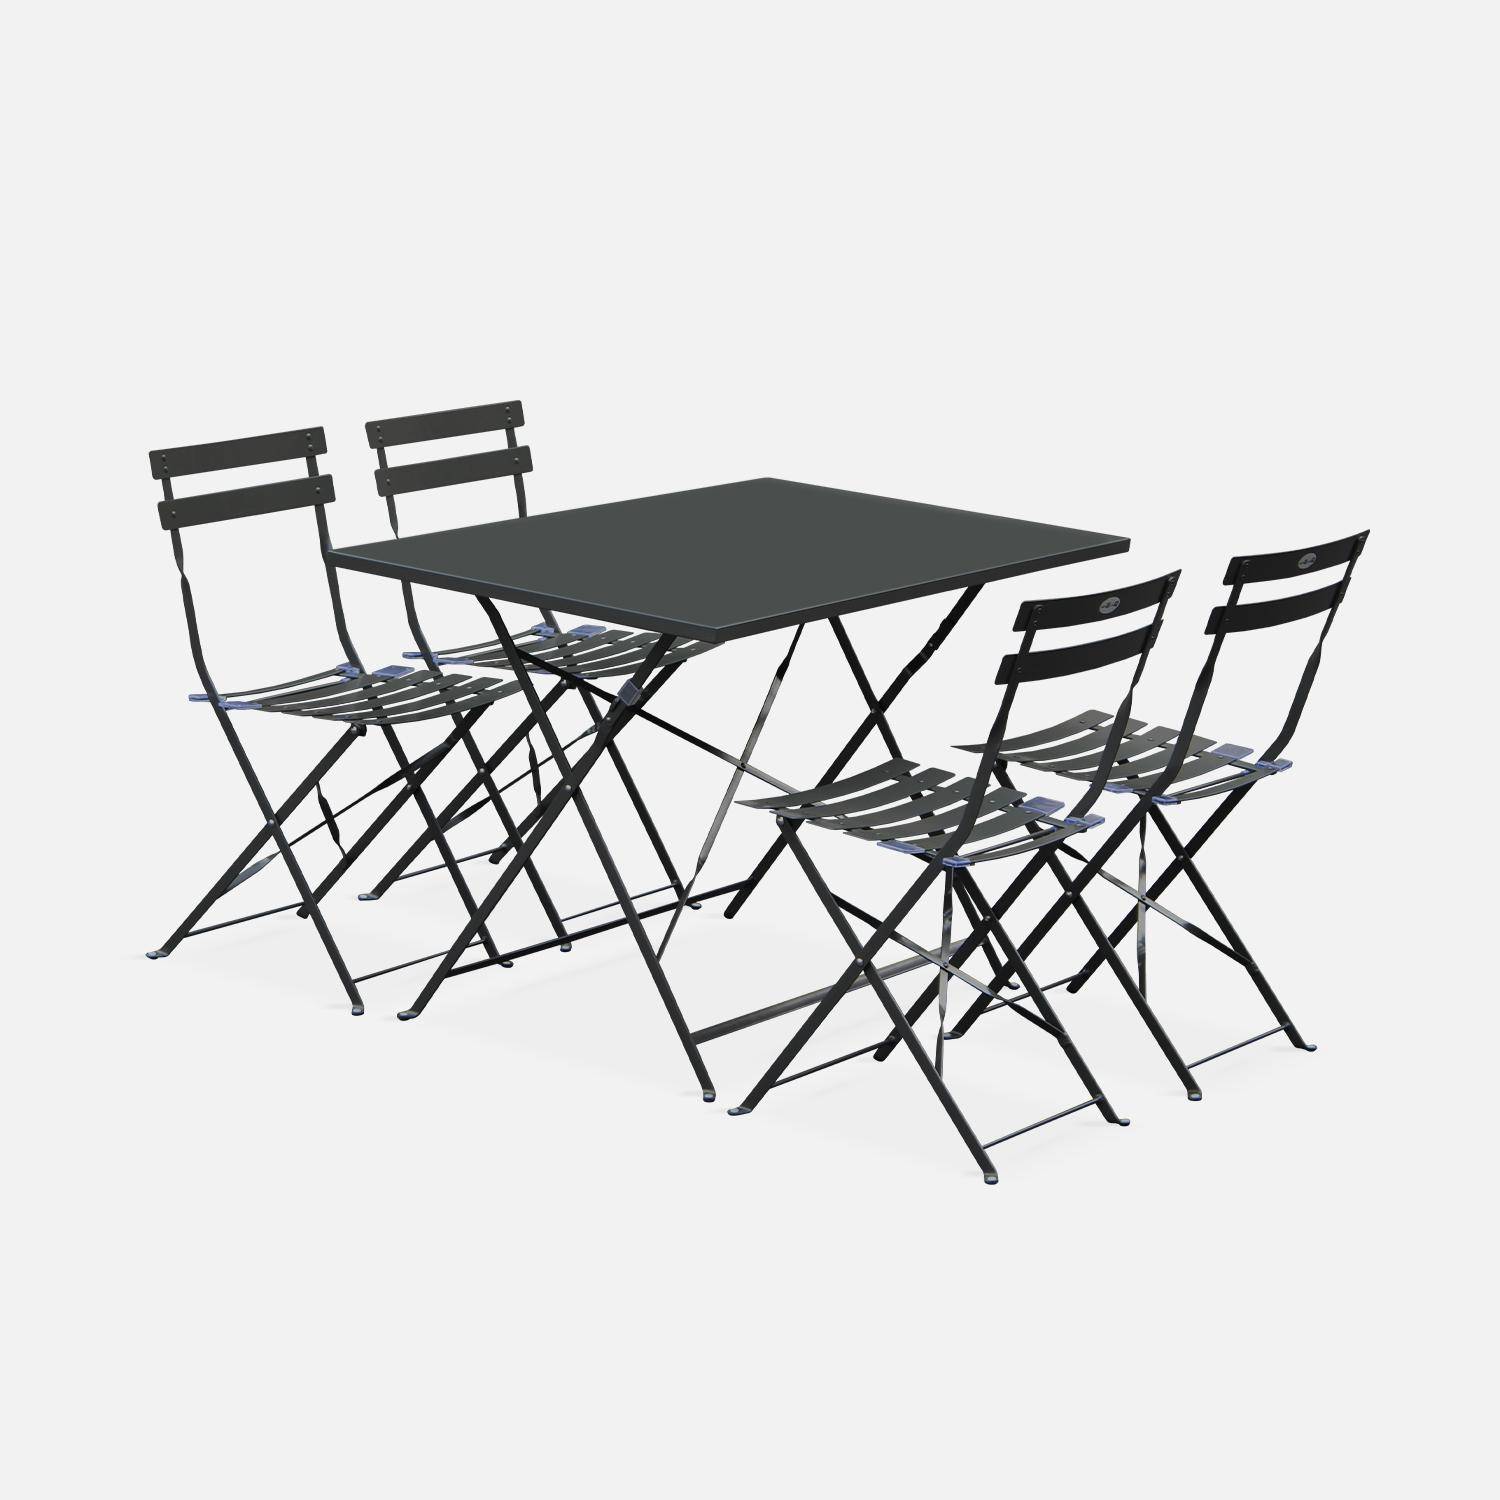 4-seater foldable thermo-lacquered steel bistro garden table with chairs, Emilia set 110cm, Anthracite Photo2